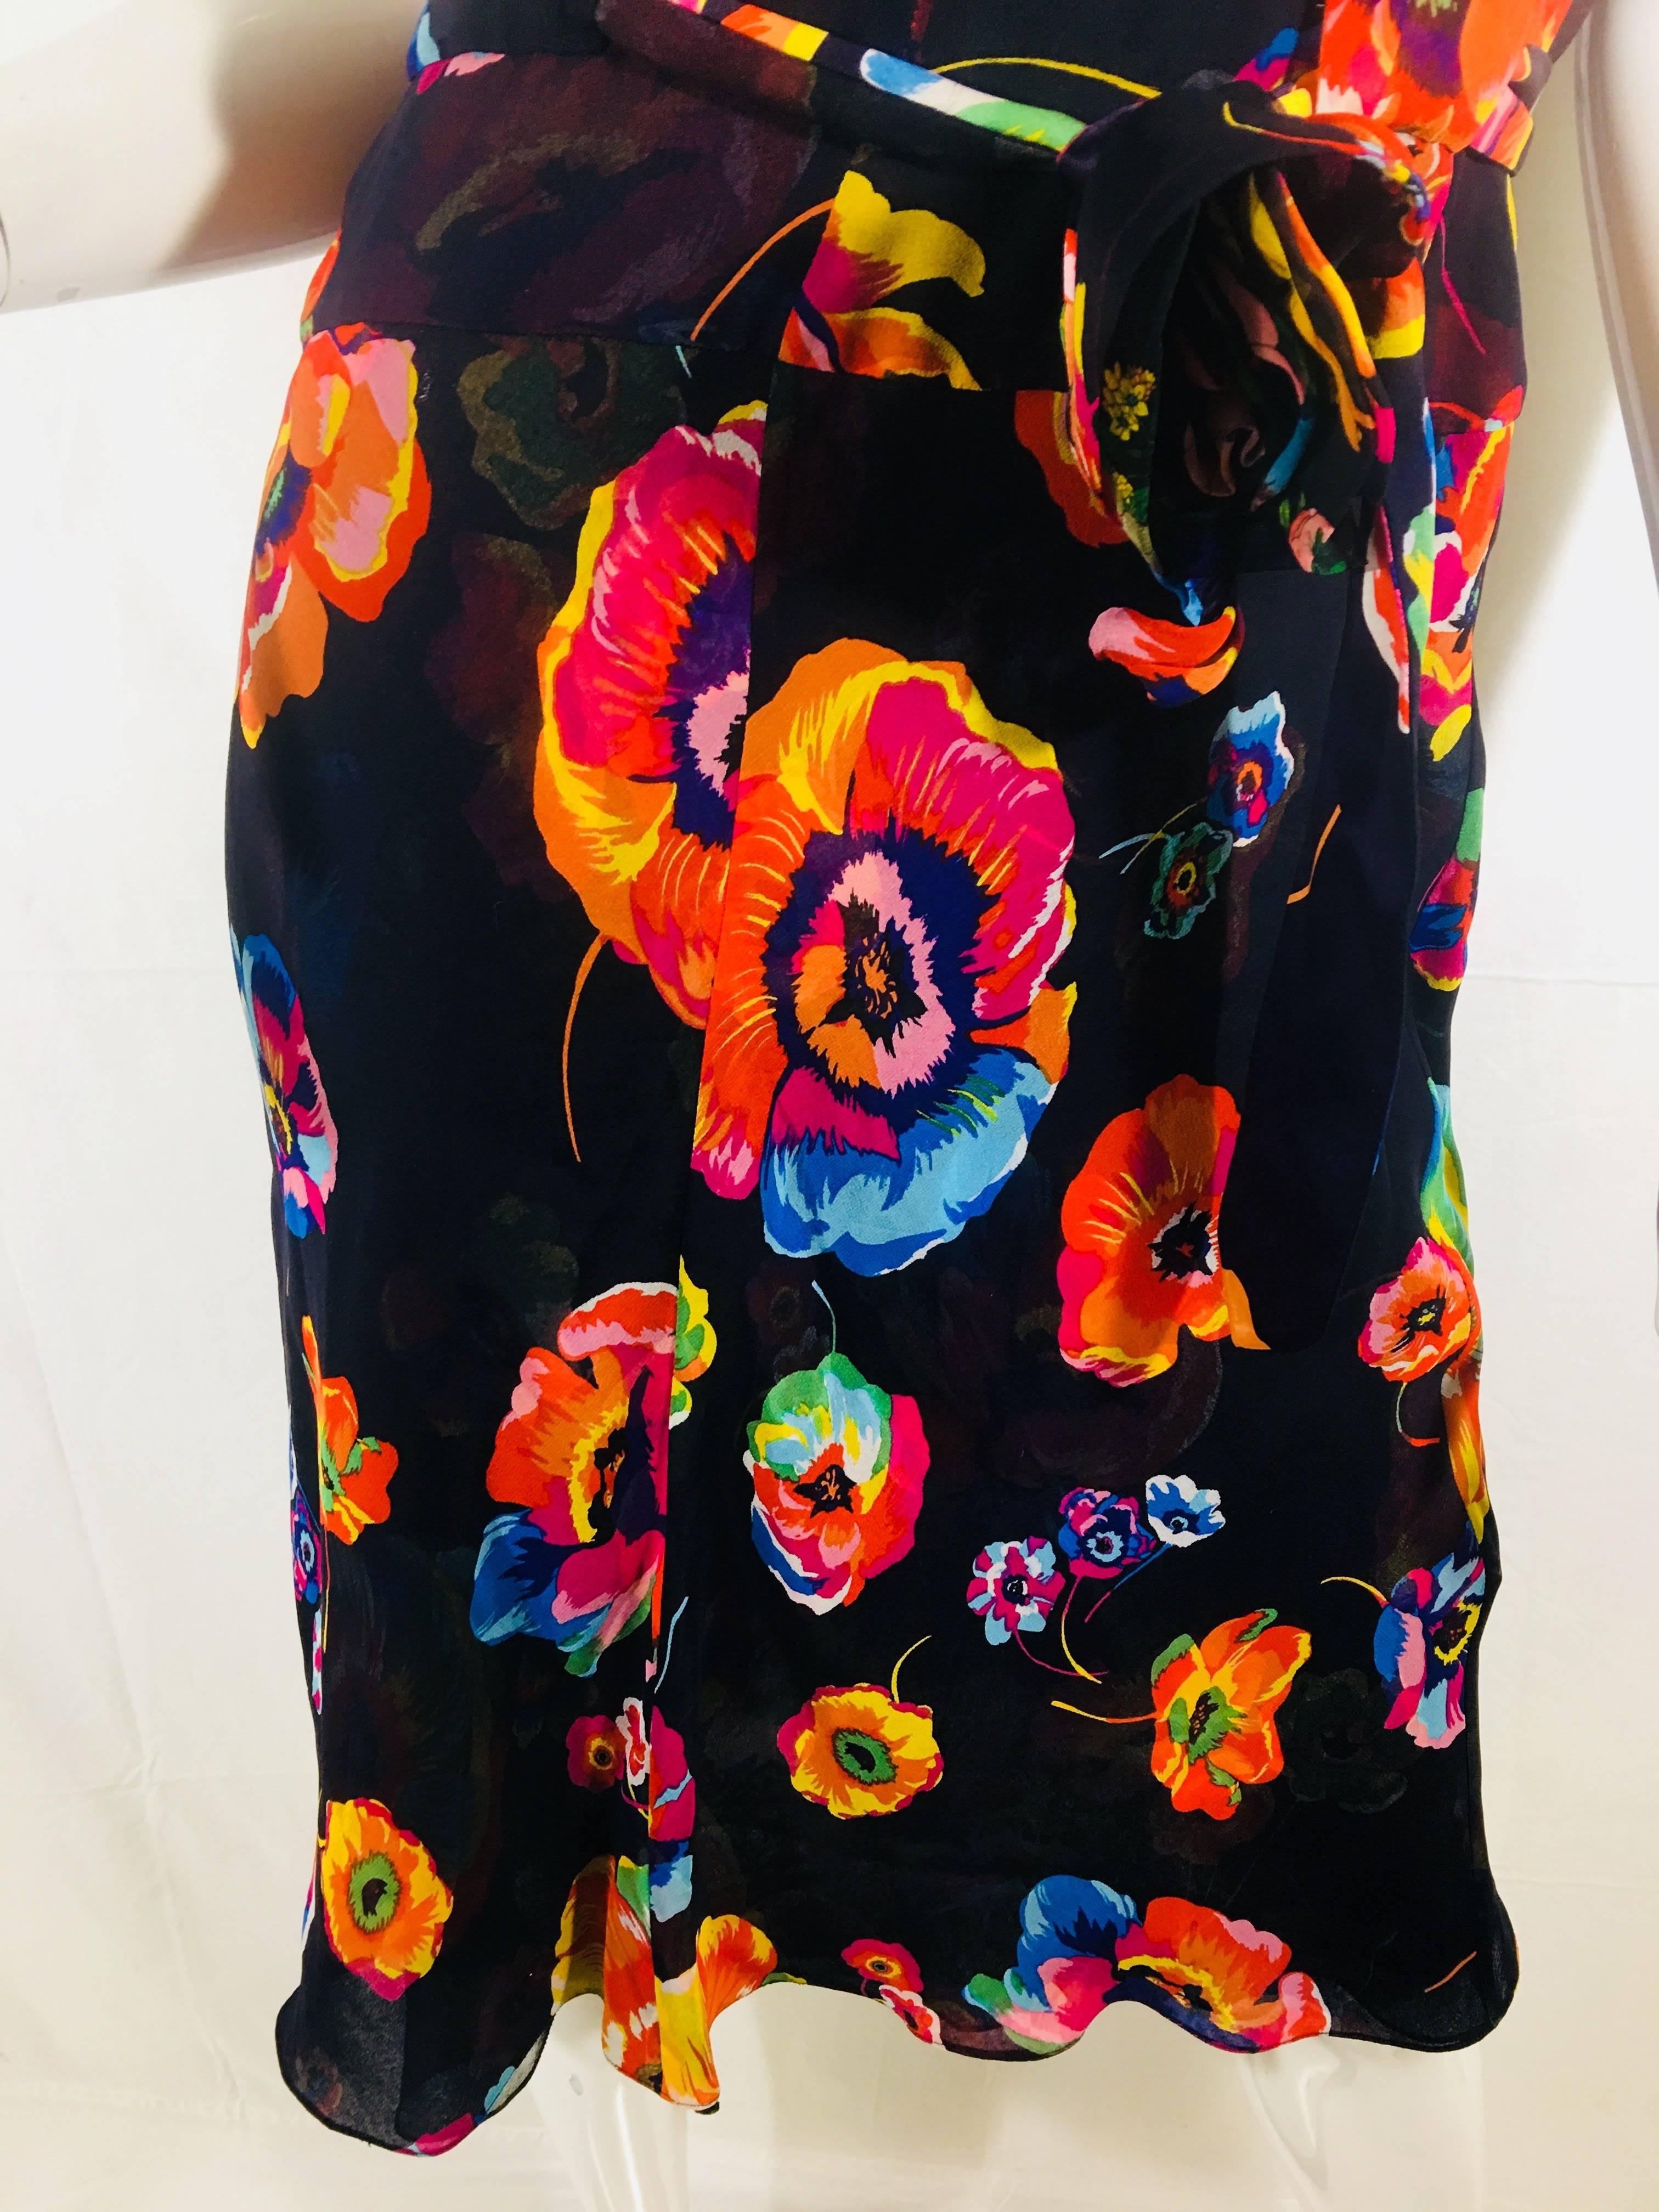 Tuleh Cap Sleeve Dress with V-Neck. Knee Length, Vibrant Floral Print, Button Up Back and Tie Around Waist with Flower Detail.
One Button Loop Needs Mending.
